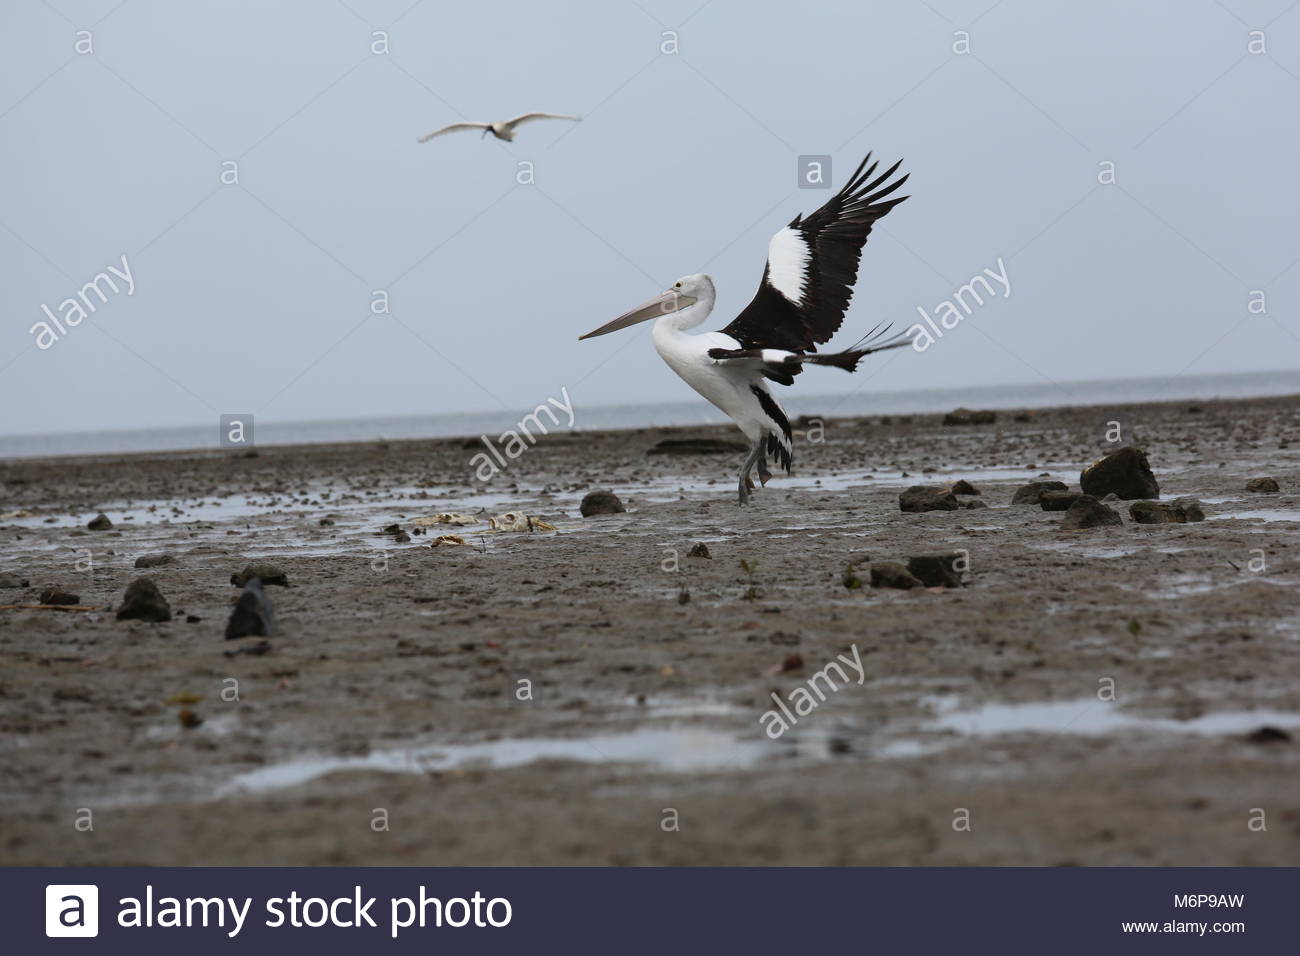 At low tide a pelican walks the mucky shore in search of food. Stock Photo